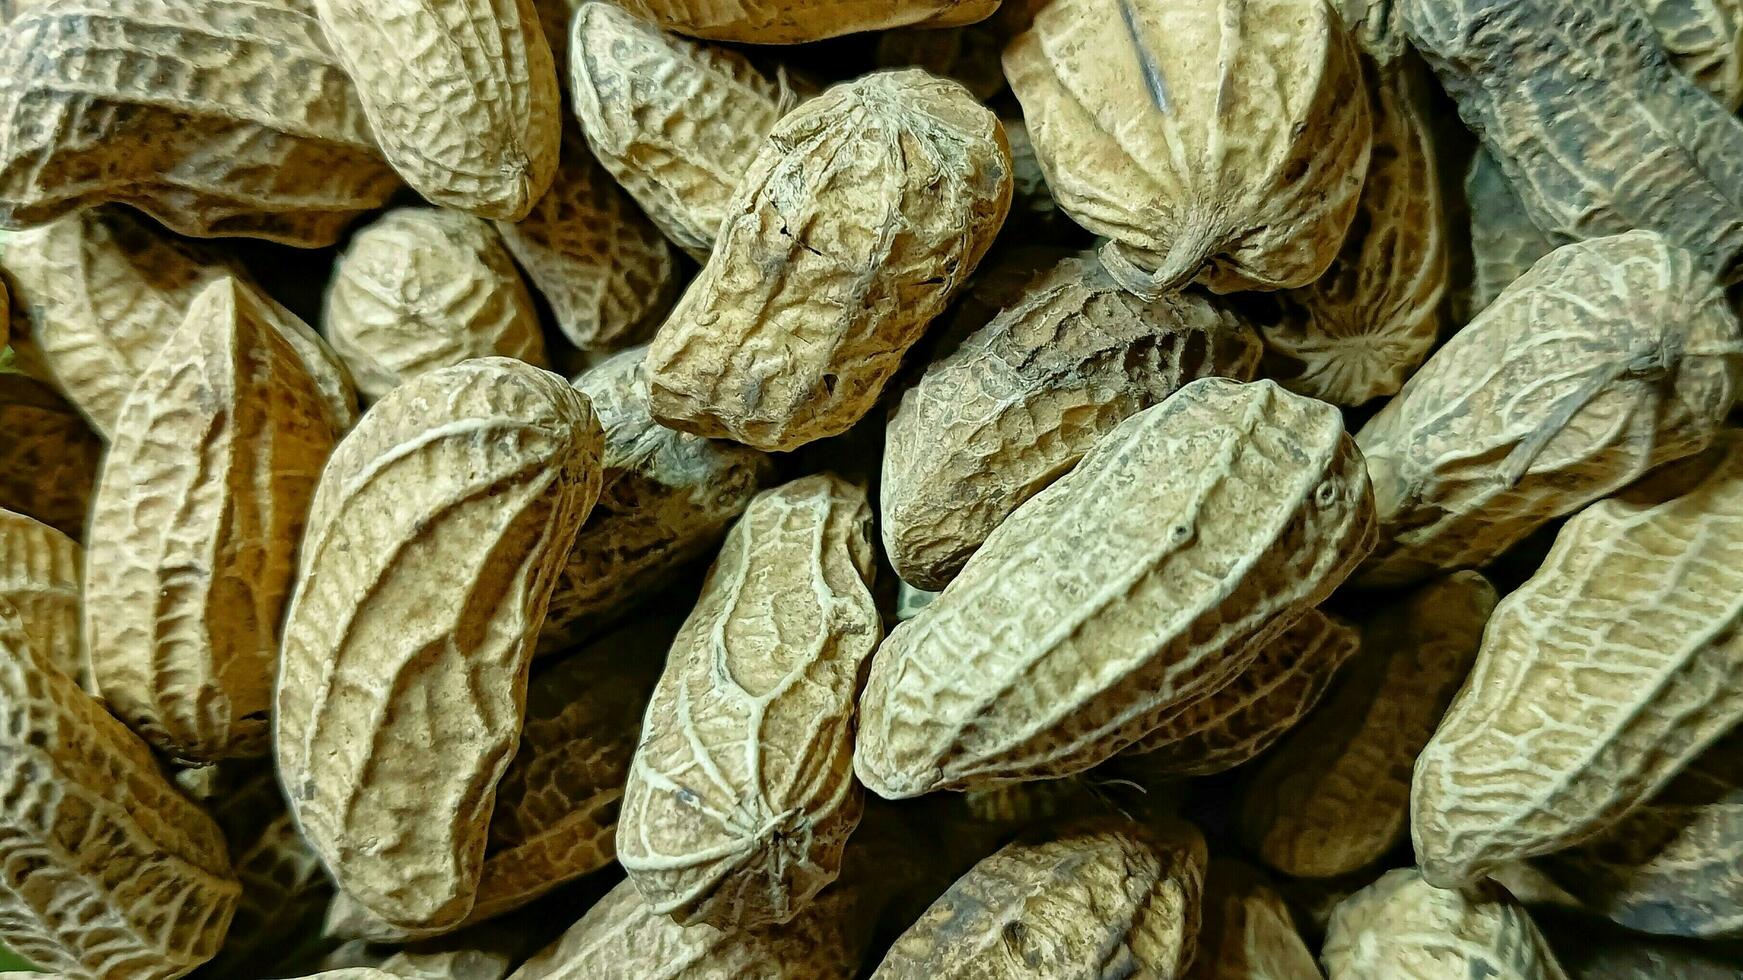 peanut texture, Close-up of a crisp, textured peanut with warm, golden-brown tones. Mouth-watering depiction of a popular snack food. Ideal for food-related publications and packaging photo